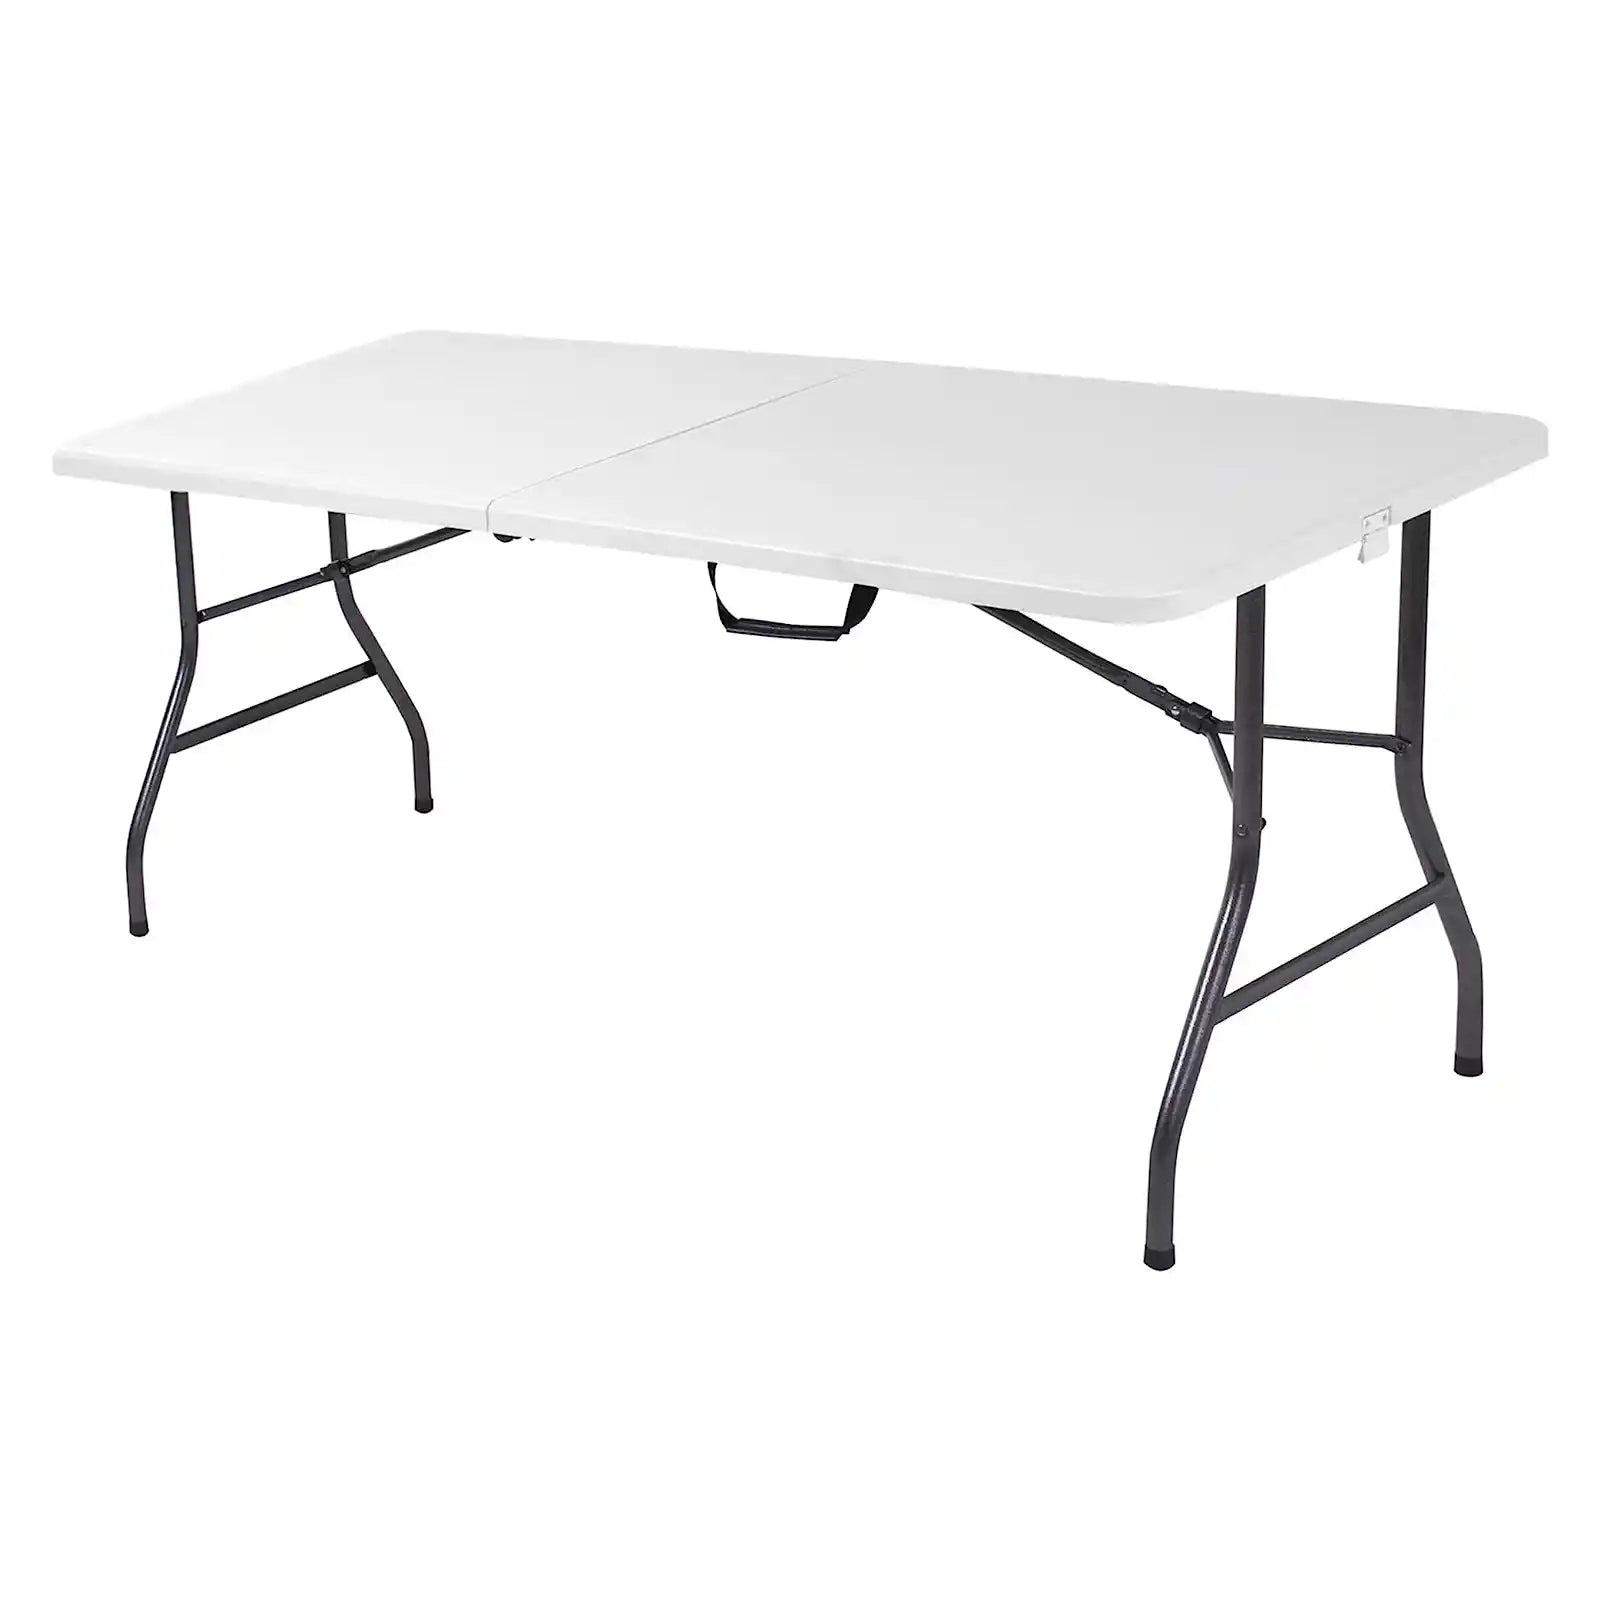 Foldable Rectangular Dining Table for Outdoor